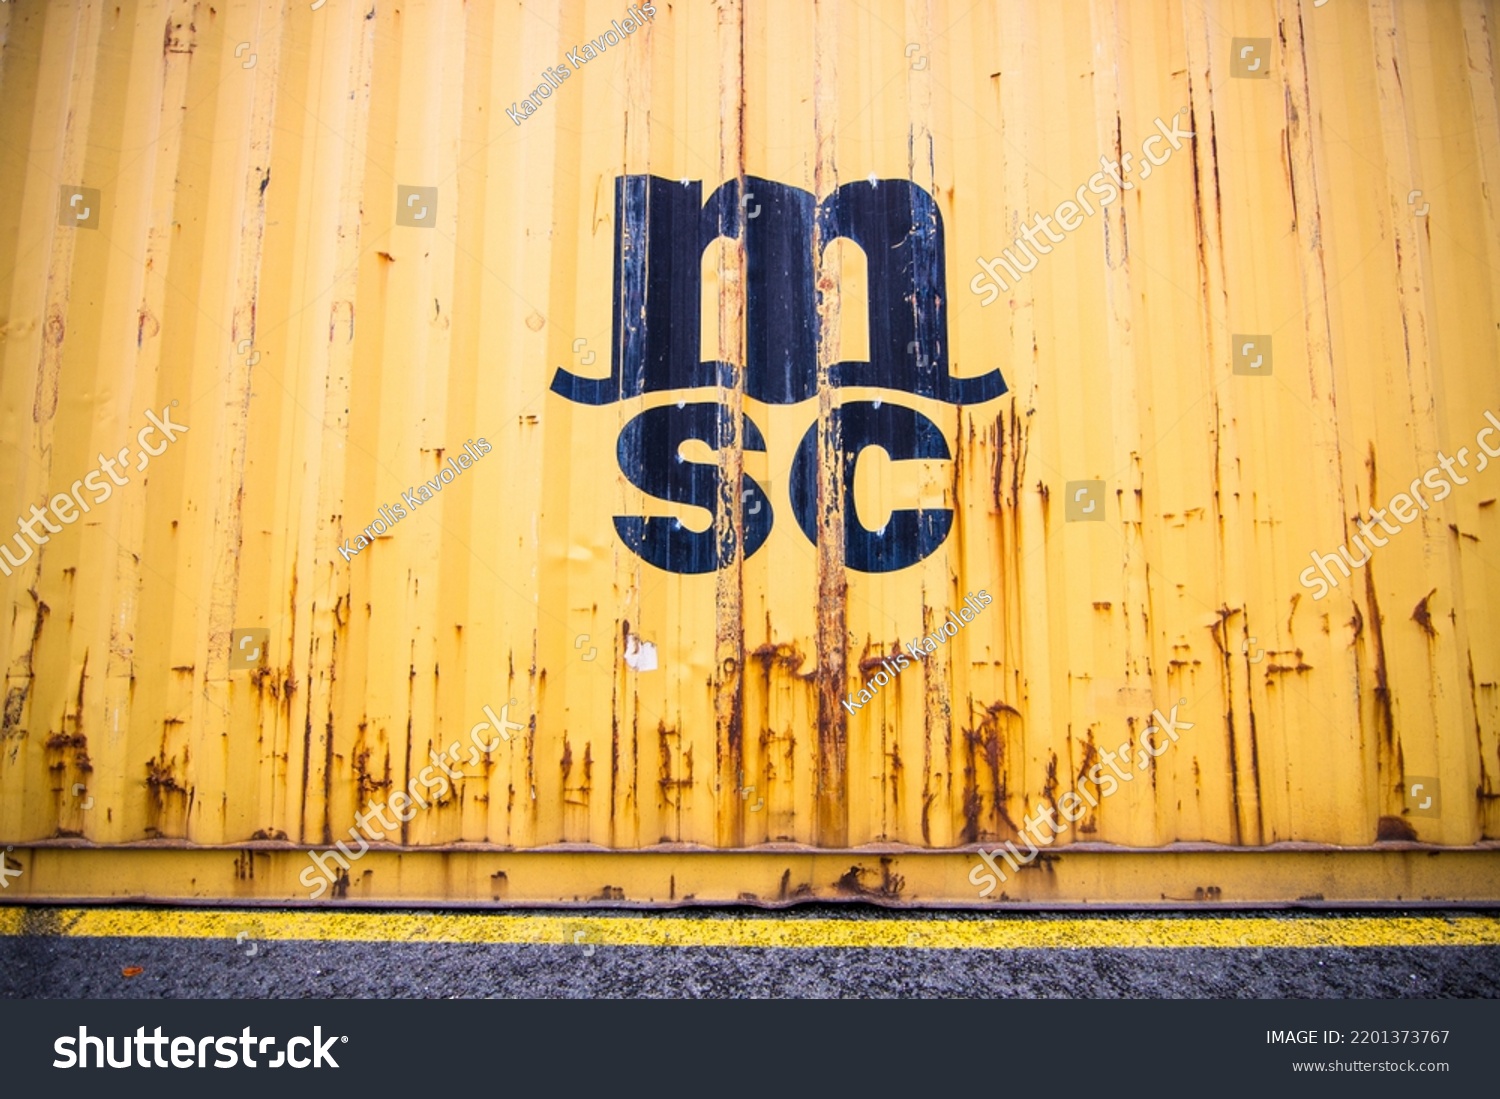 1,519 Logistics container logo Stock Photos, Images & Photography ...